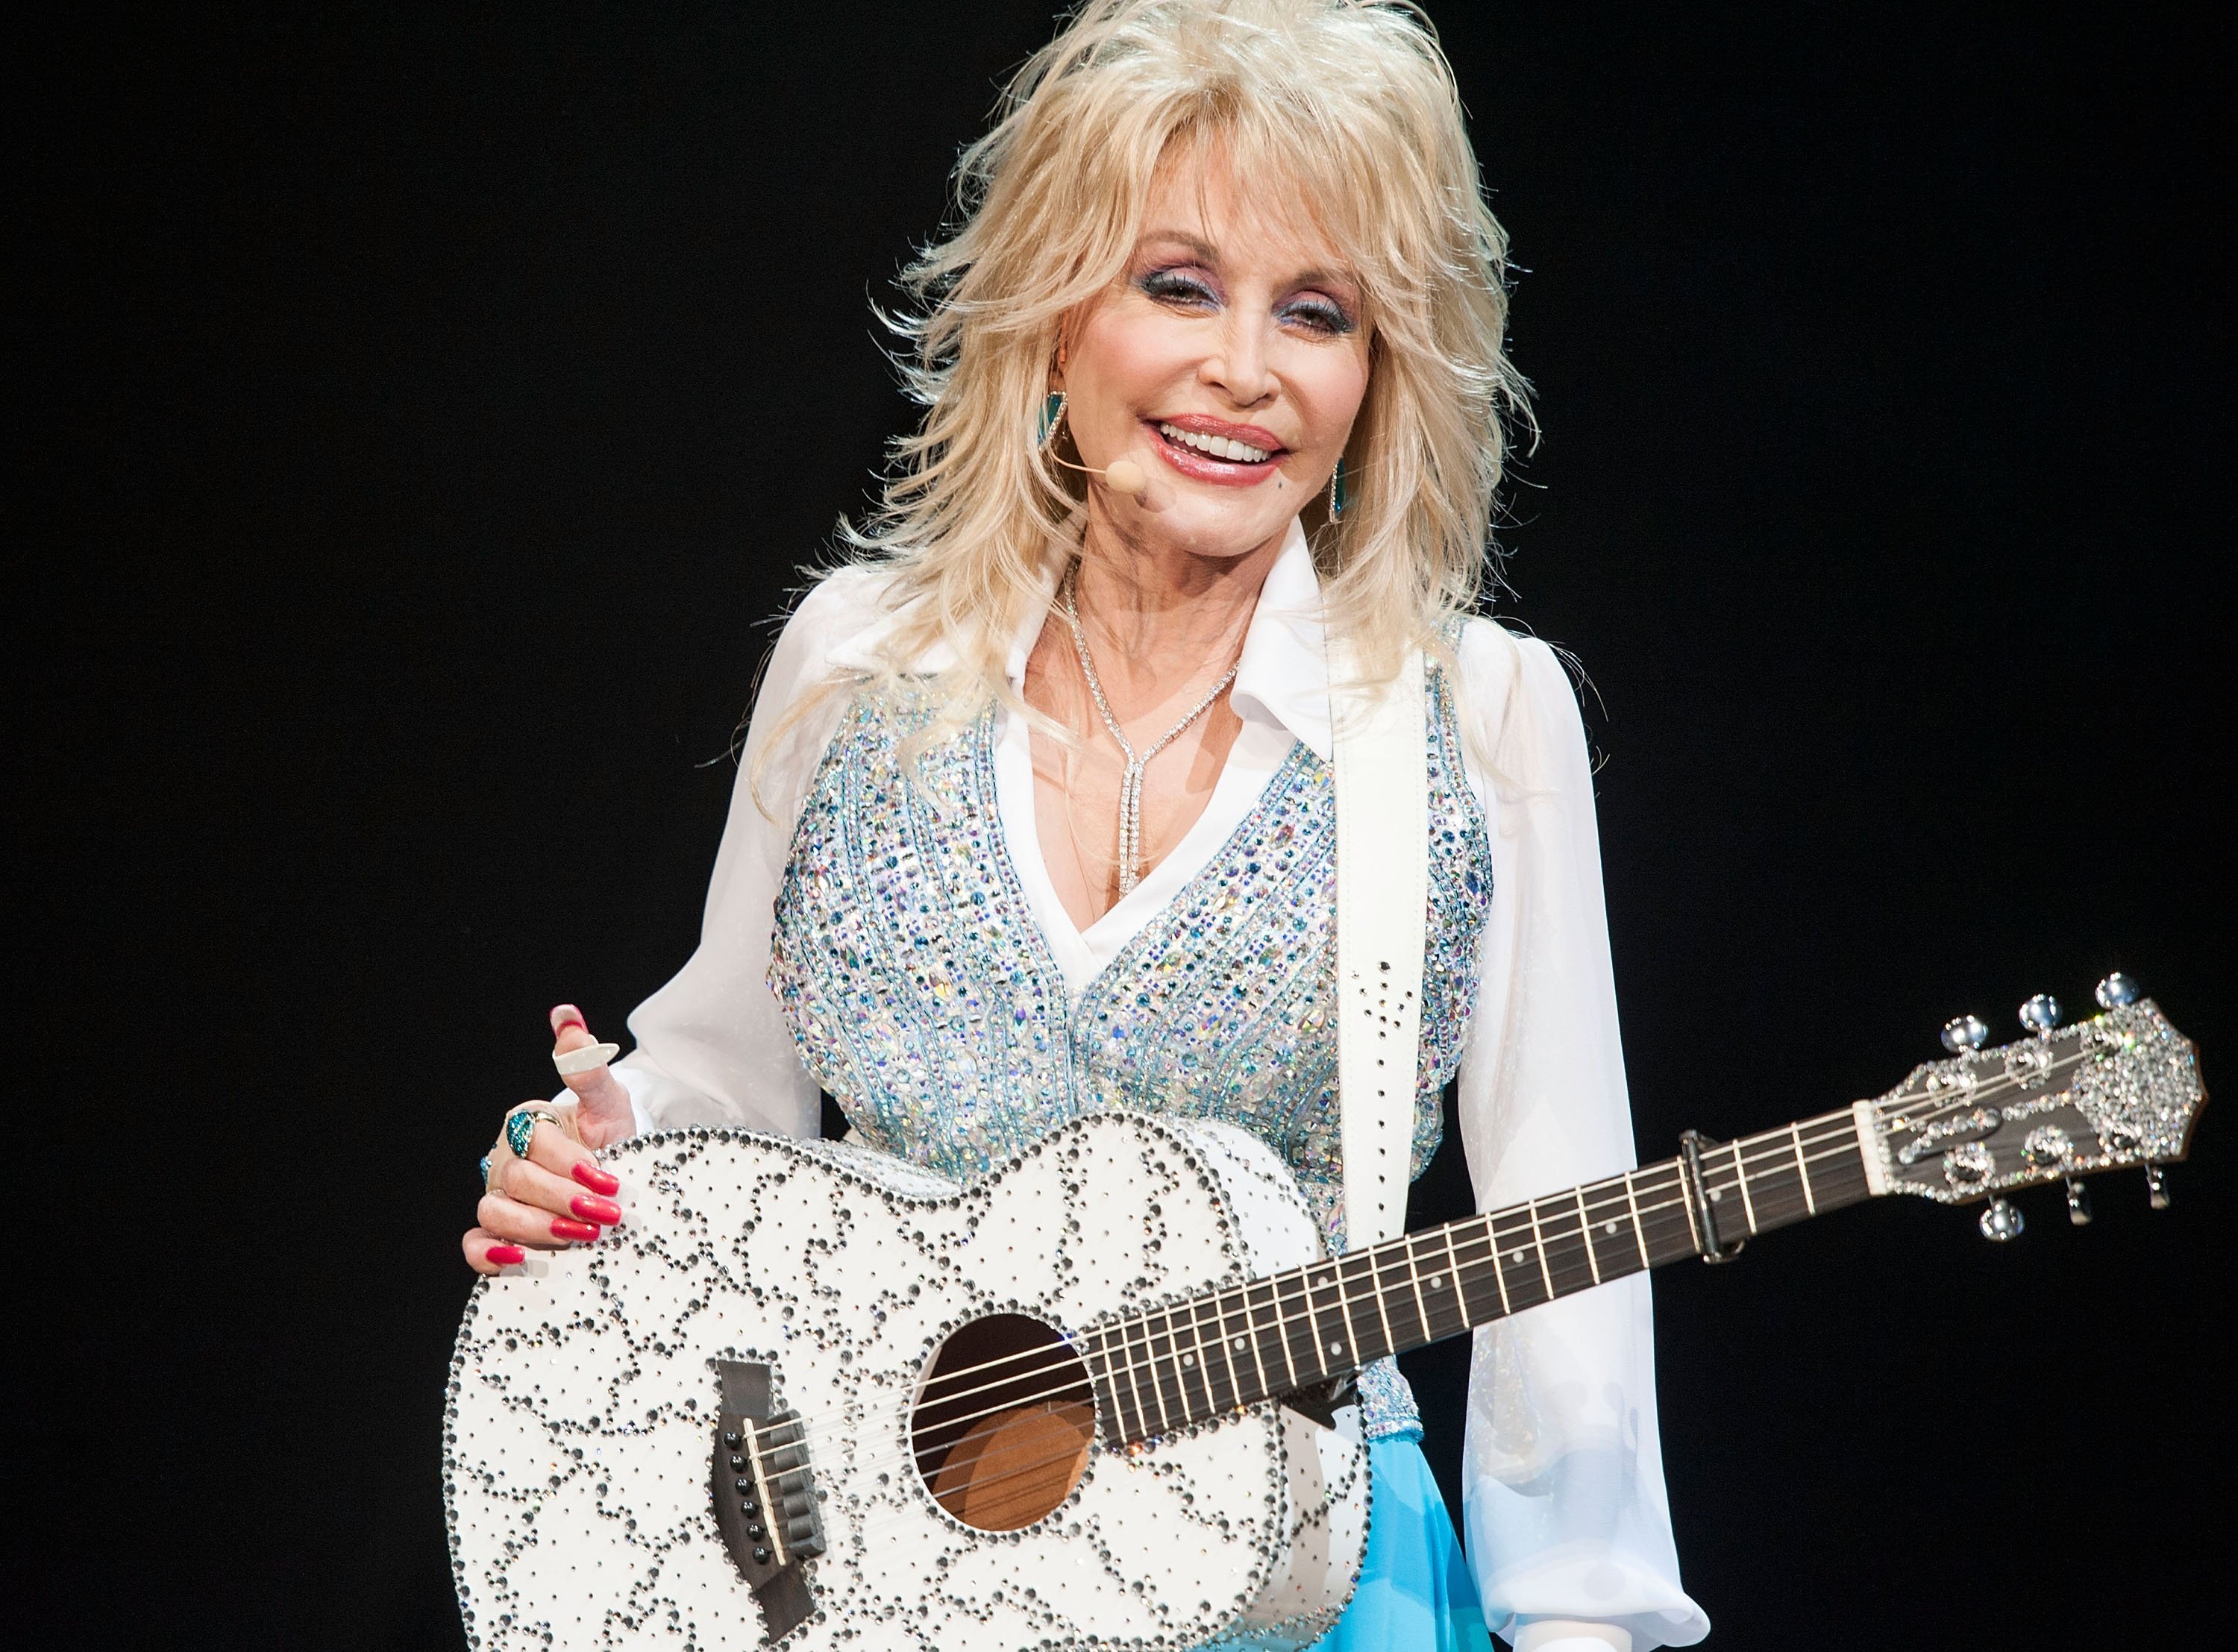 Singer Dolly Parton Performs at Agua Caliente Casino on January 24, 2014| Photo: Getty Images